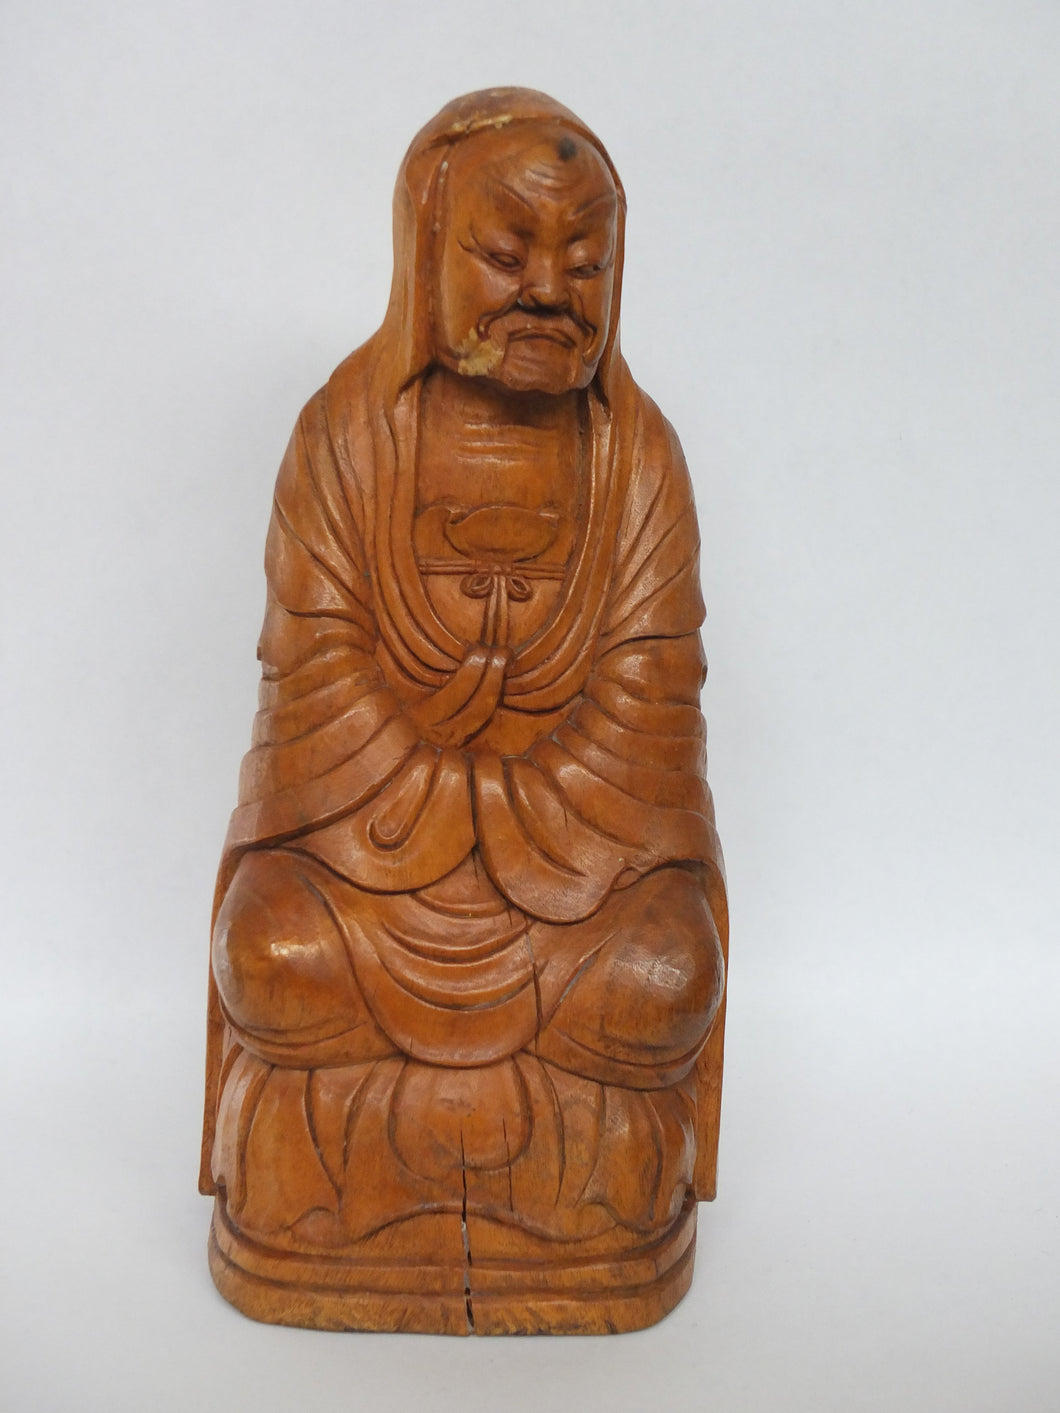 Vintage Bamboo Carving of a Monk identified as the 261st Zen Patriach